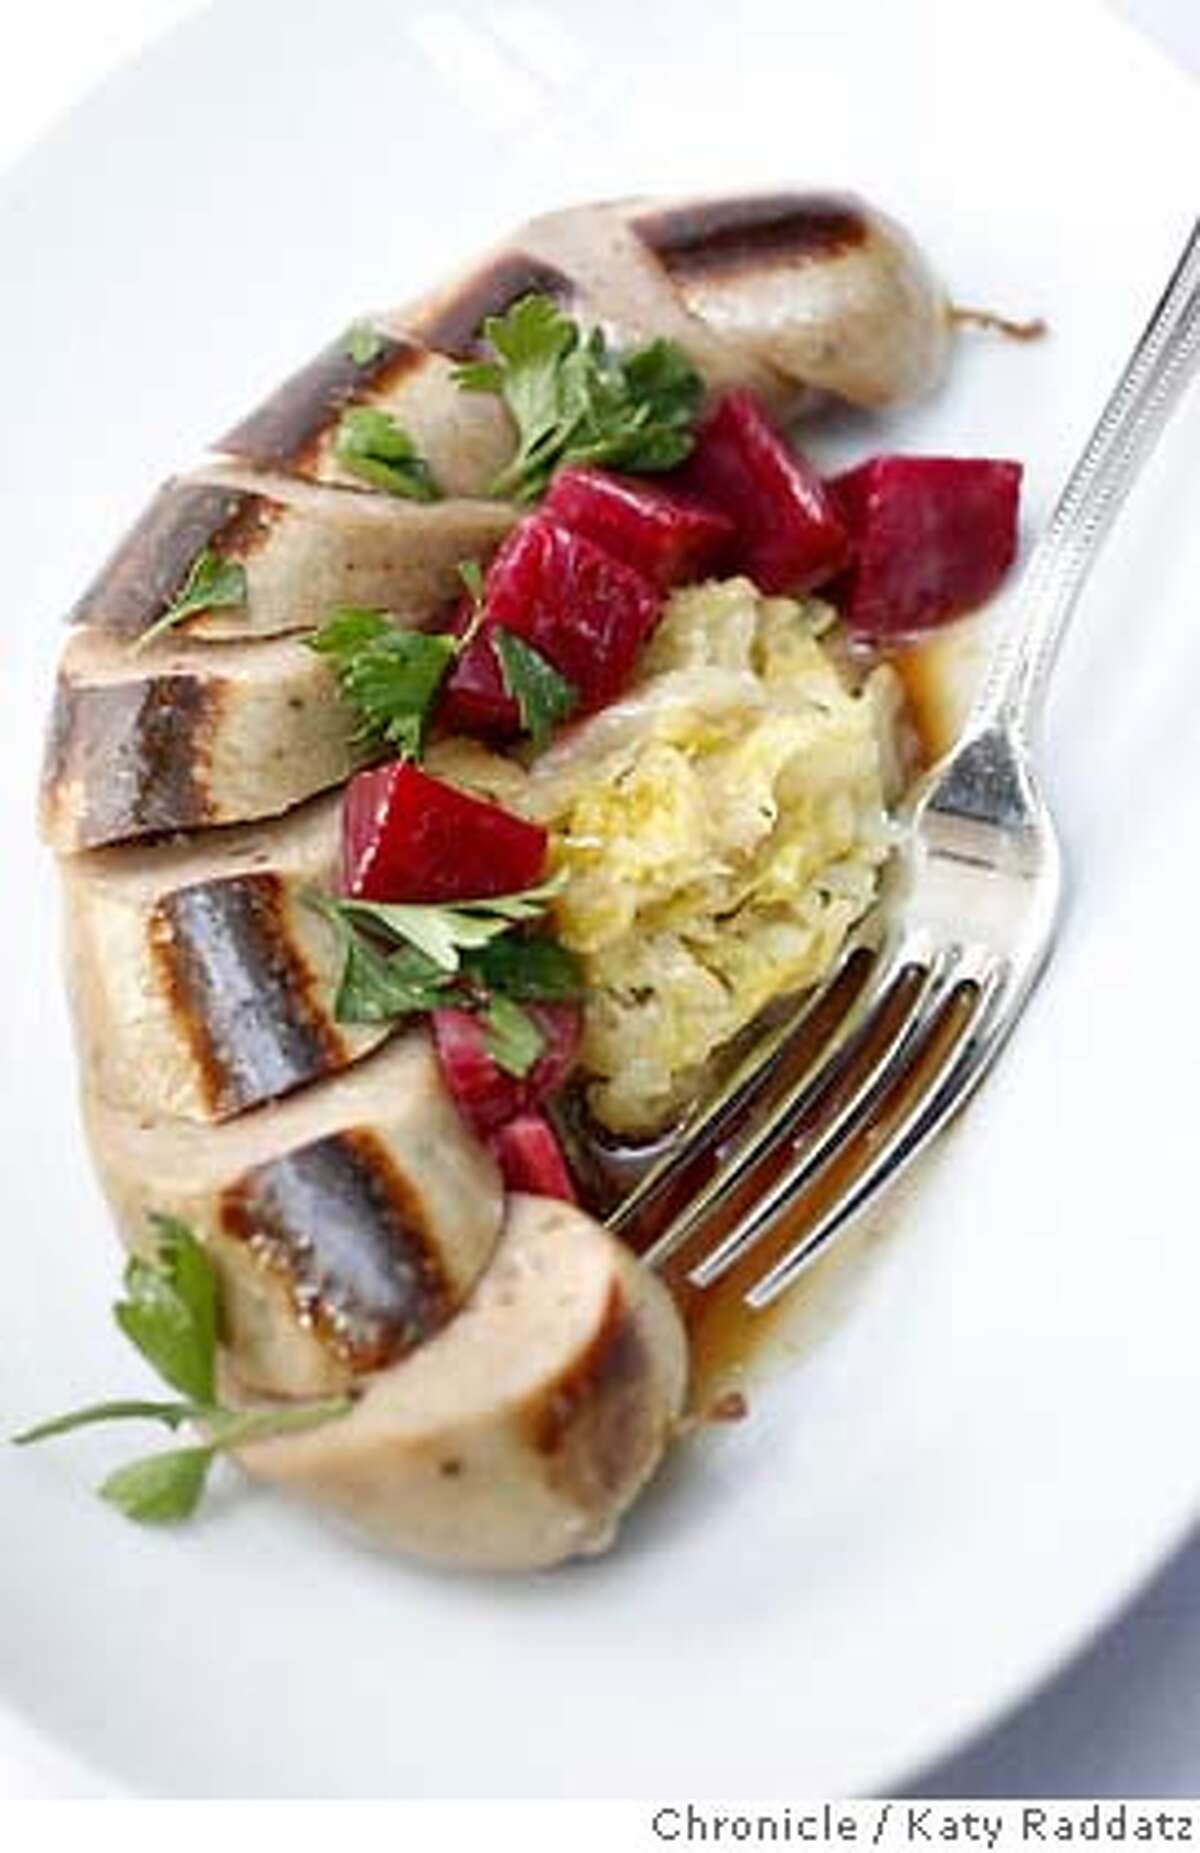 d.14SPRUCE_035_RAD.jpg SHOWN: Boudin Blanc with house made sauerkraut and beets from the restaurant's farm. Spruce is an important restaurant that has just opened in San Francisco at 3640 Sacramento St. (Katy Raddatz/The Chronicle) **